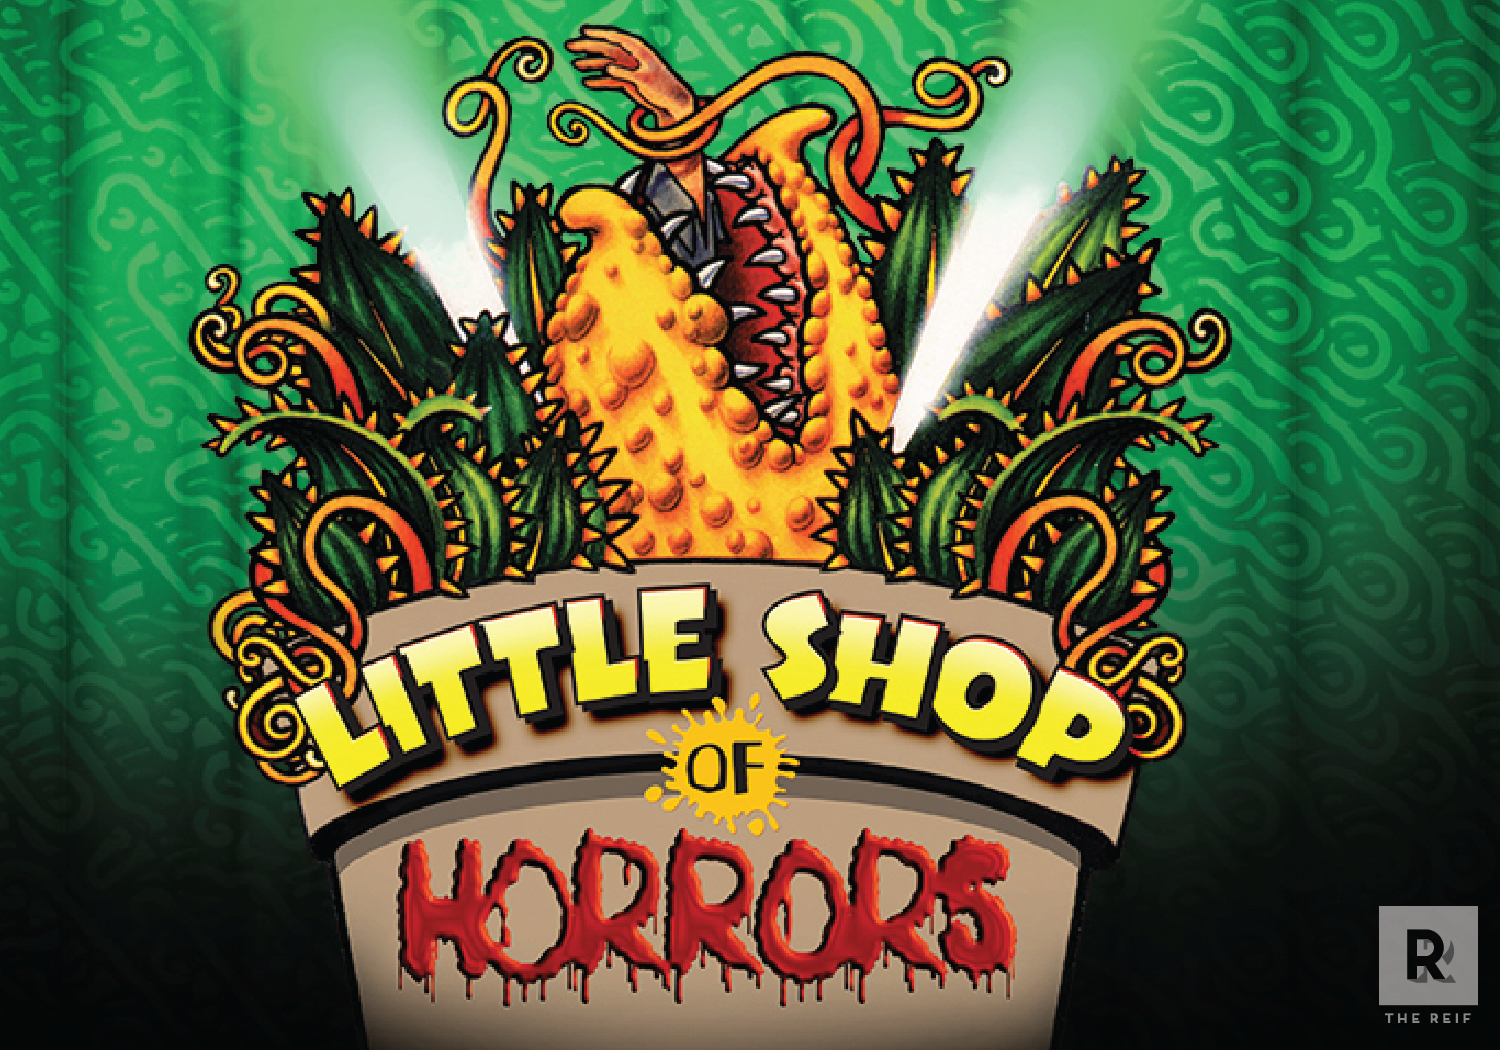 Reif Theater Arts: Little Shop of Horrors